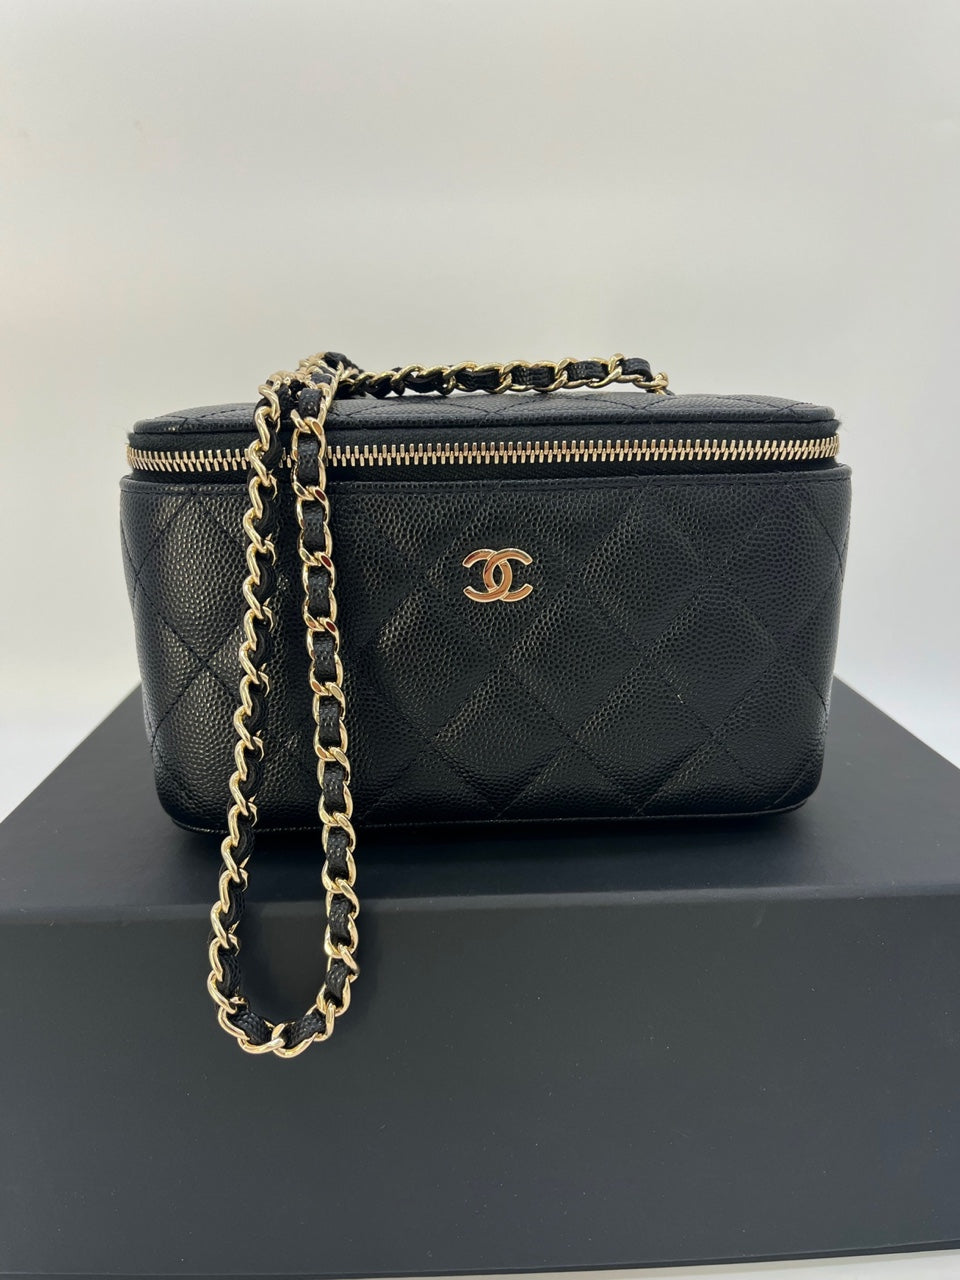 Guarantee Authentic CHANEL Caviar Quilted Gold Hardware Small Tiny CC Vanity Case With Chain Black Crossbody